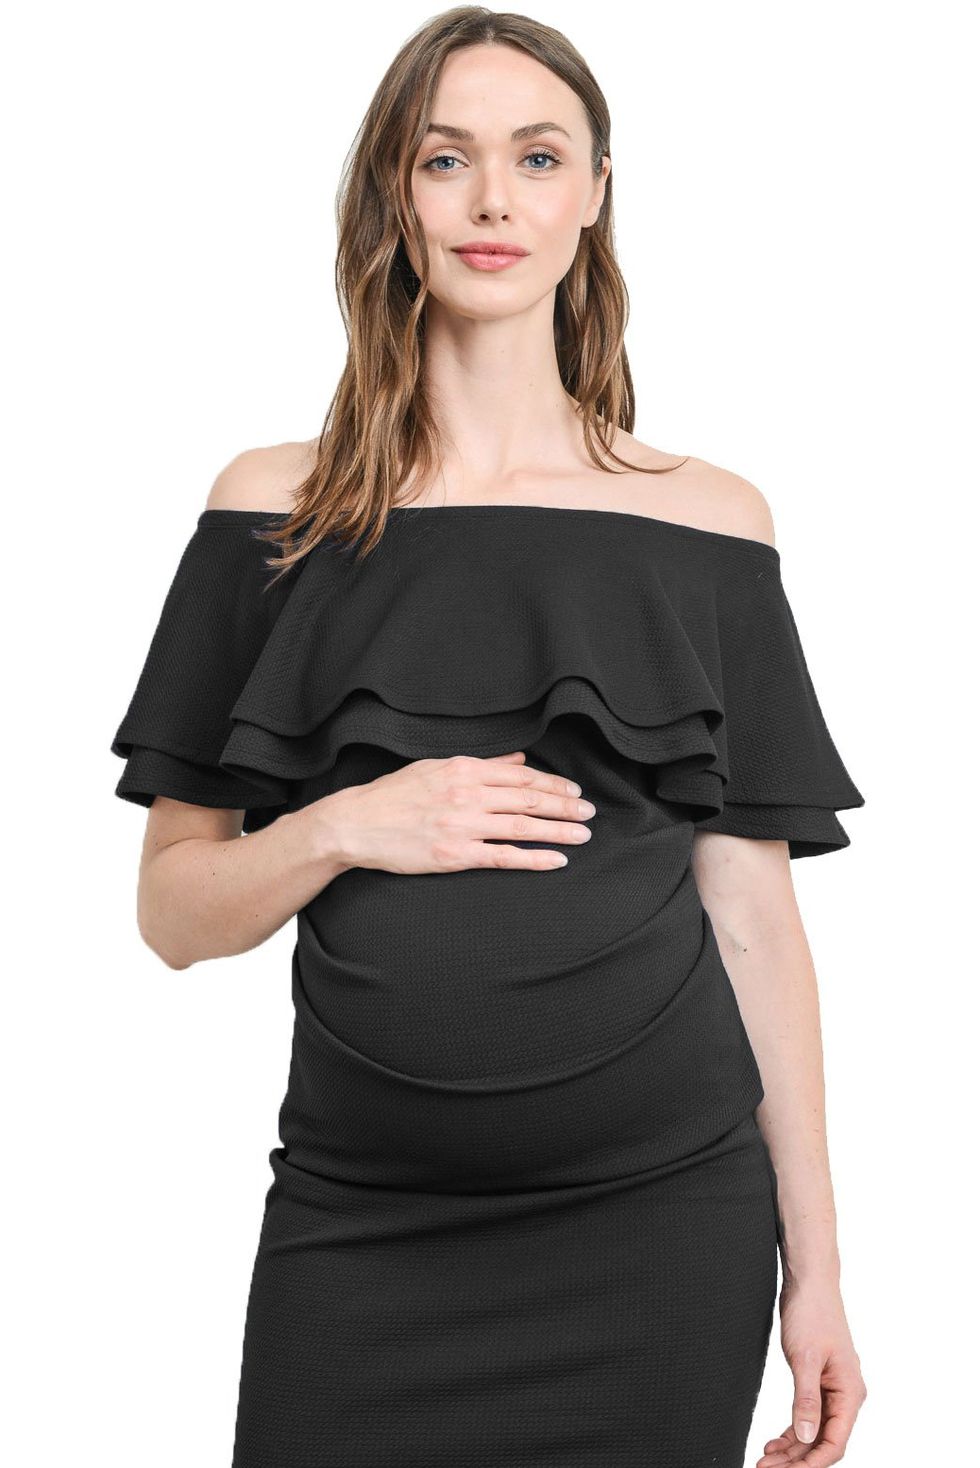 LaClef Women's Wrapped Ruched Maternity Dress with Pocket